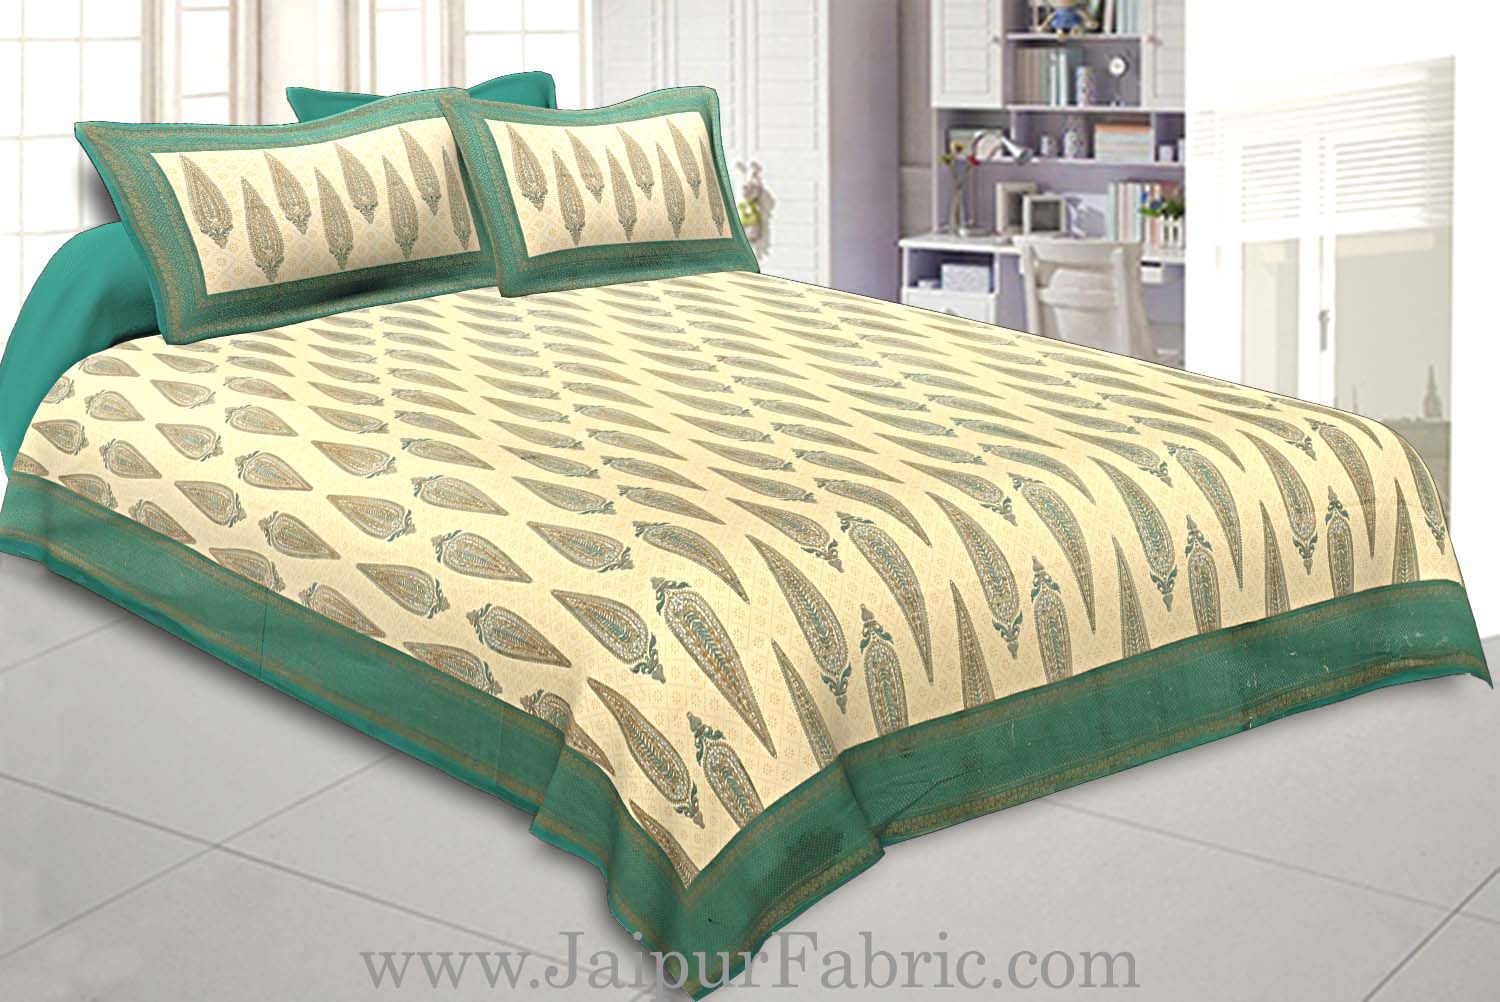 King Size Bedsheet Sea Green Border Golden Paisley Print With